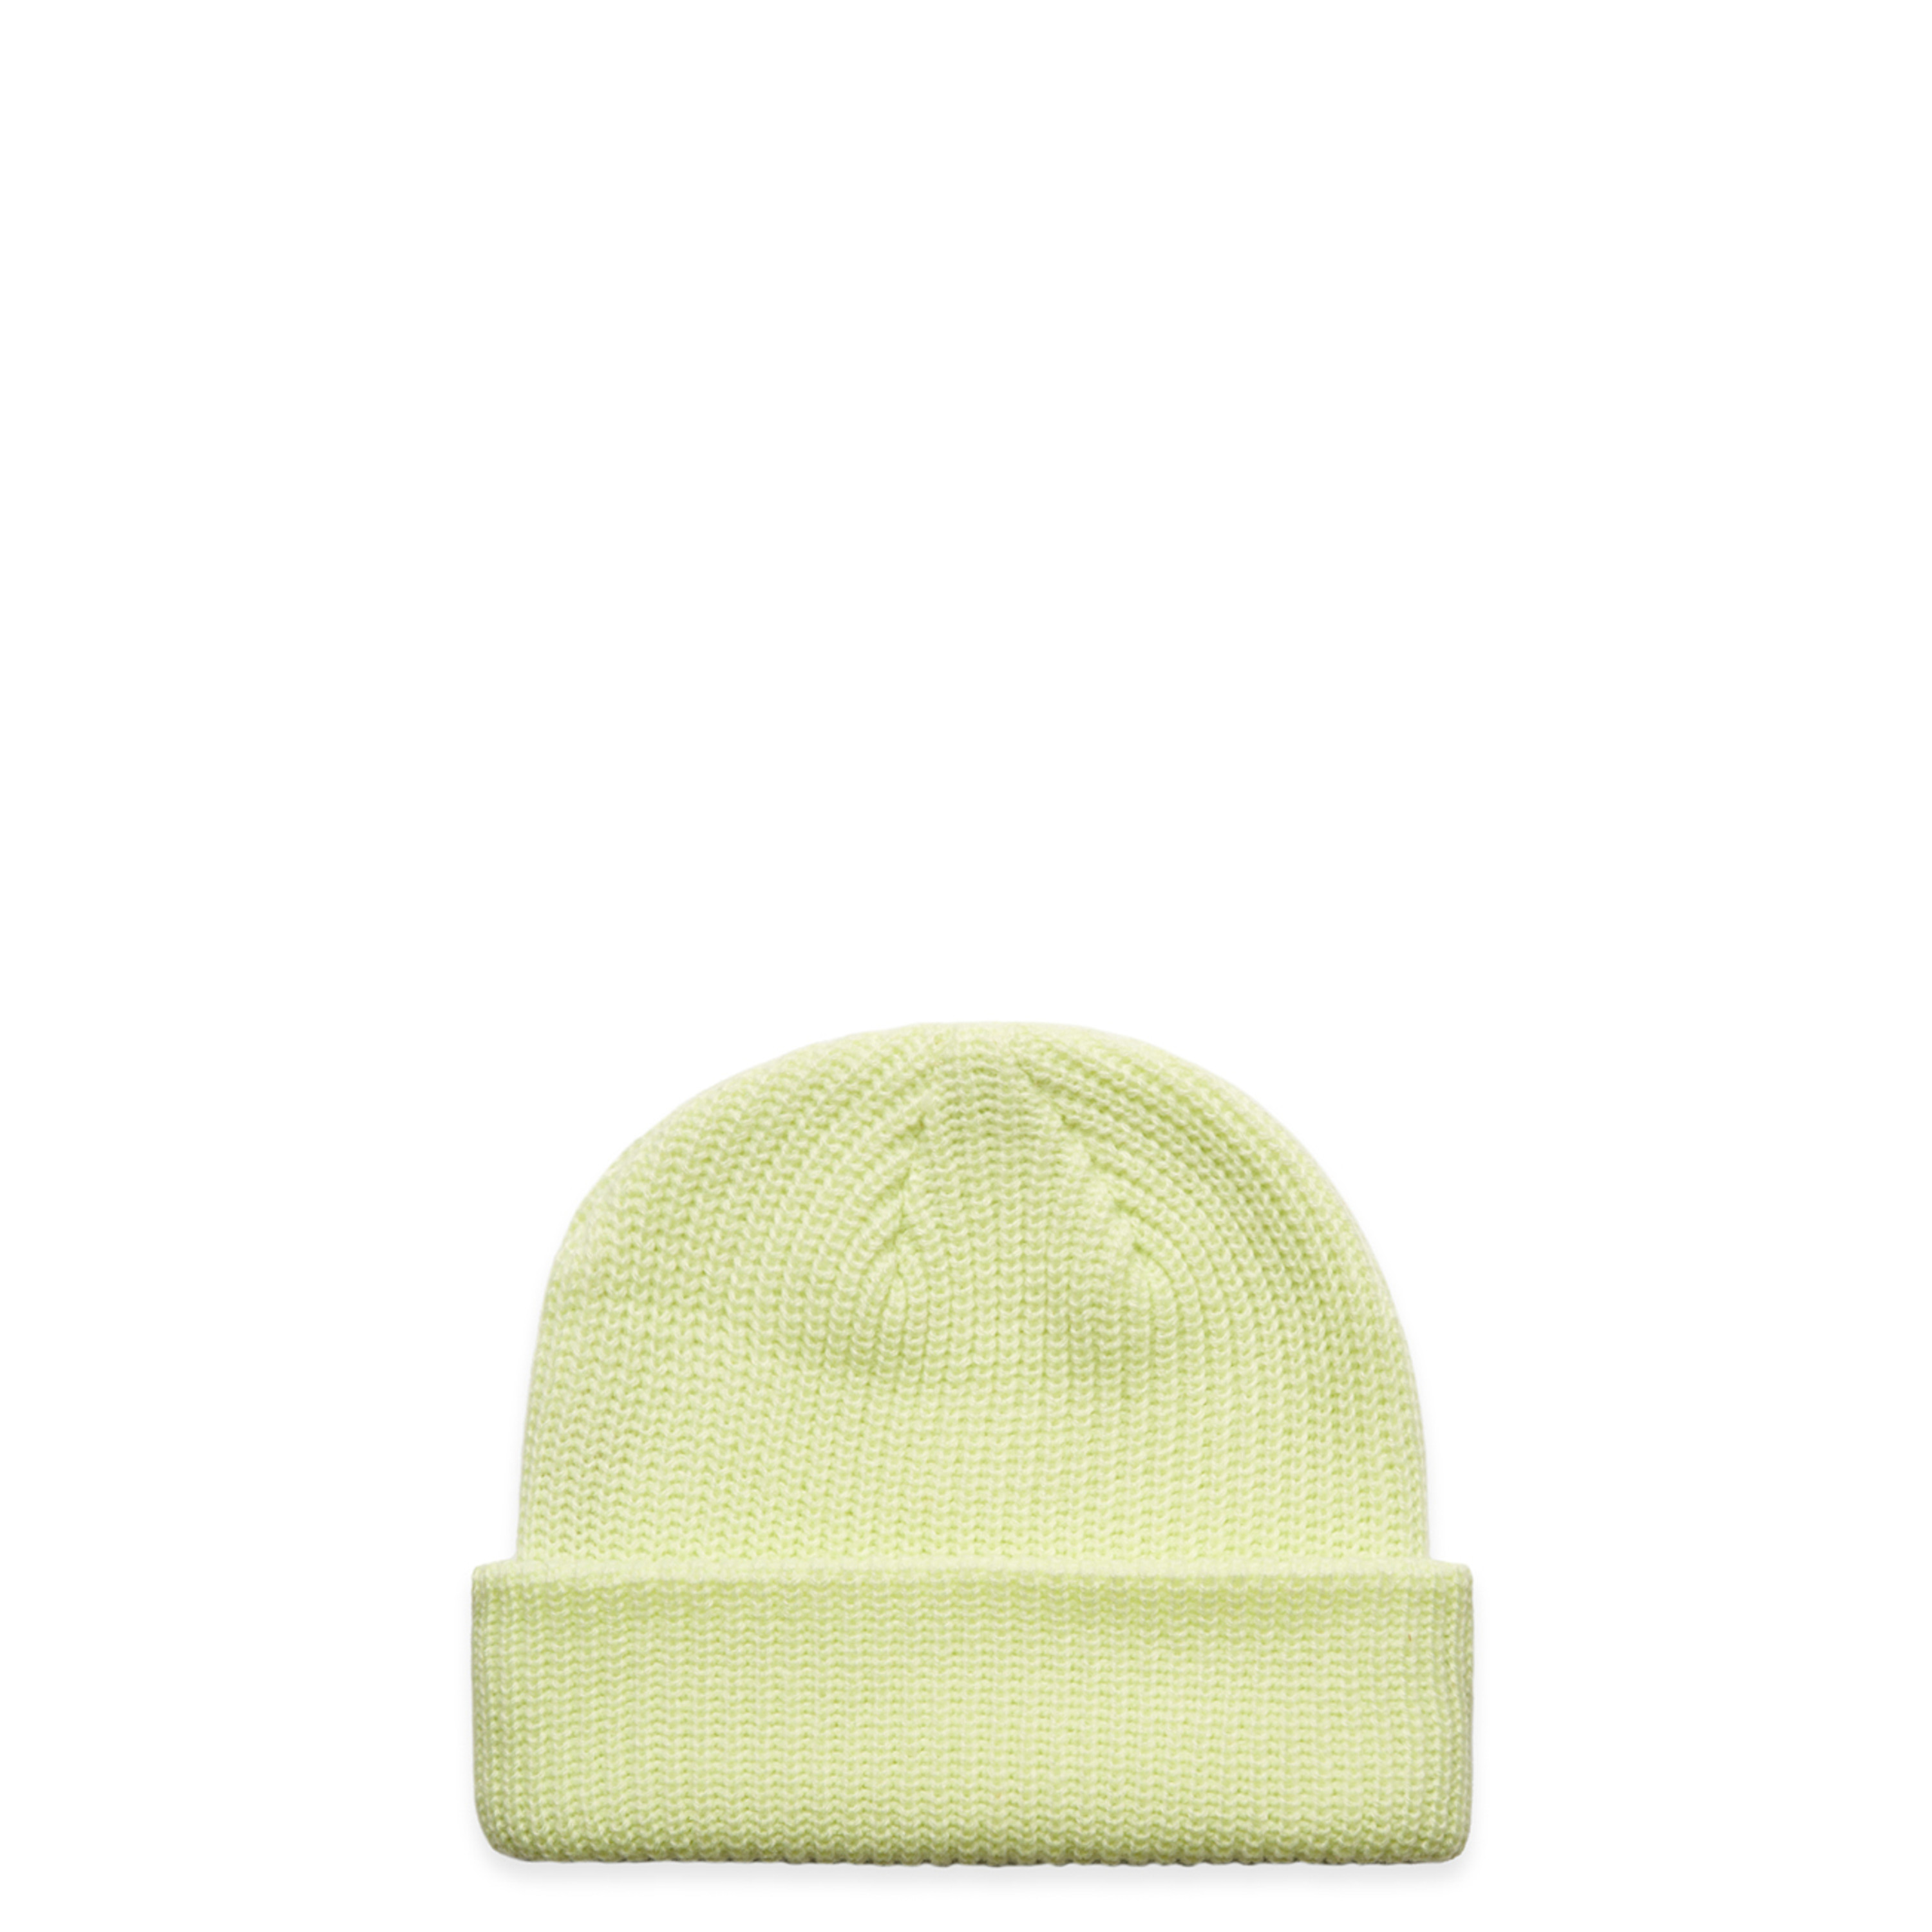 Cable Beanie - 1120